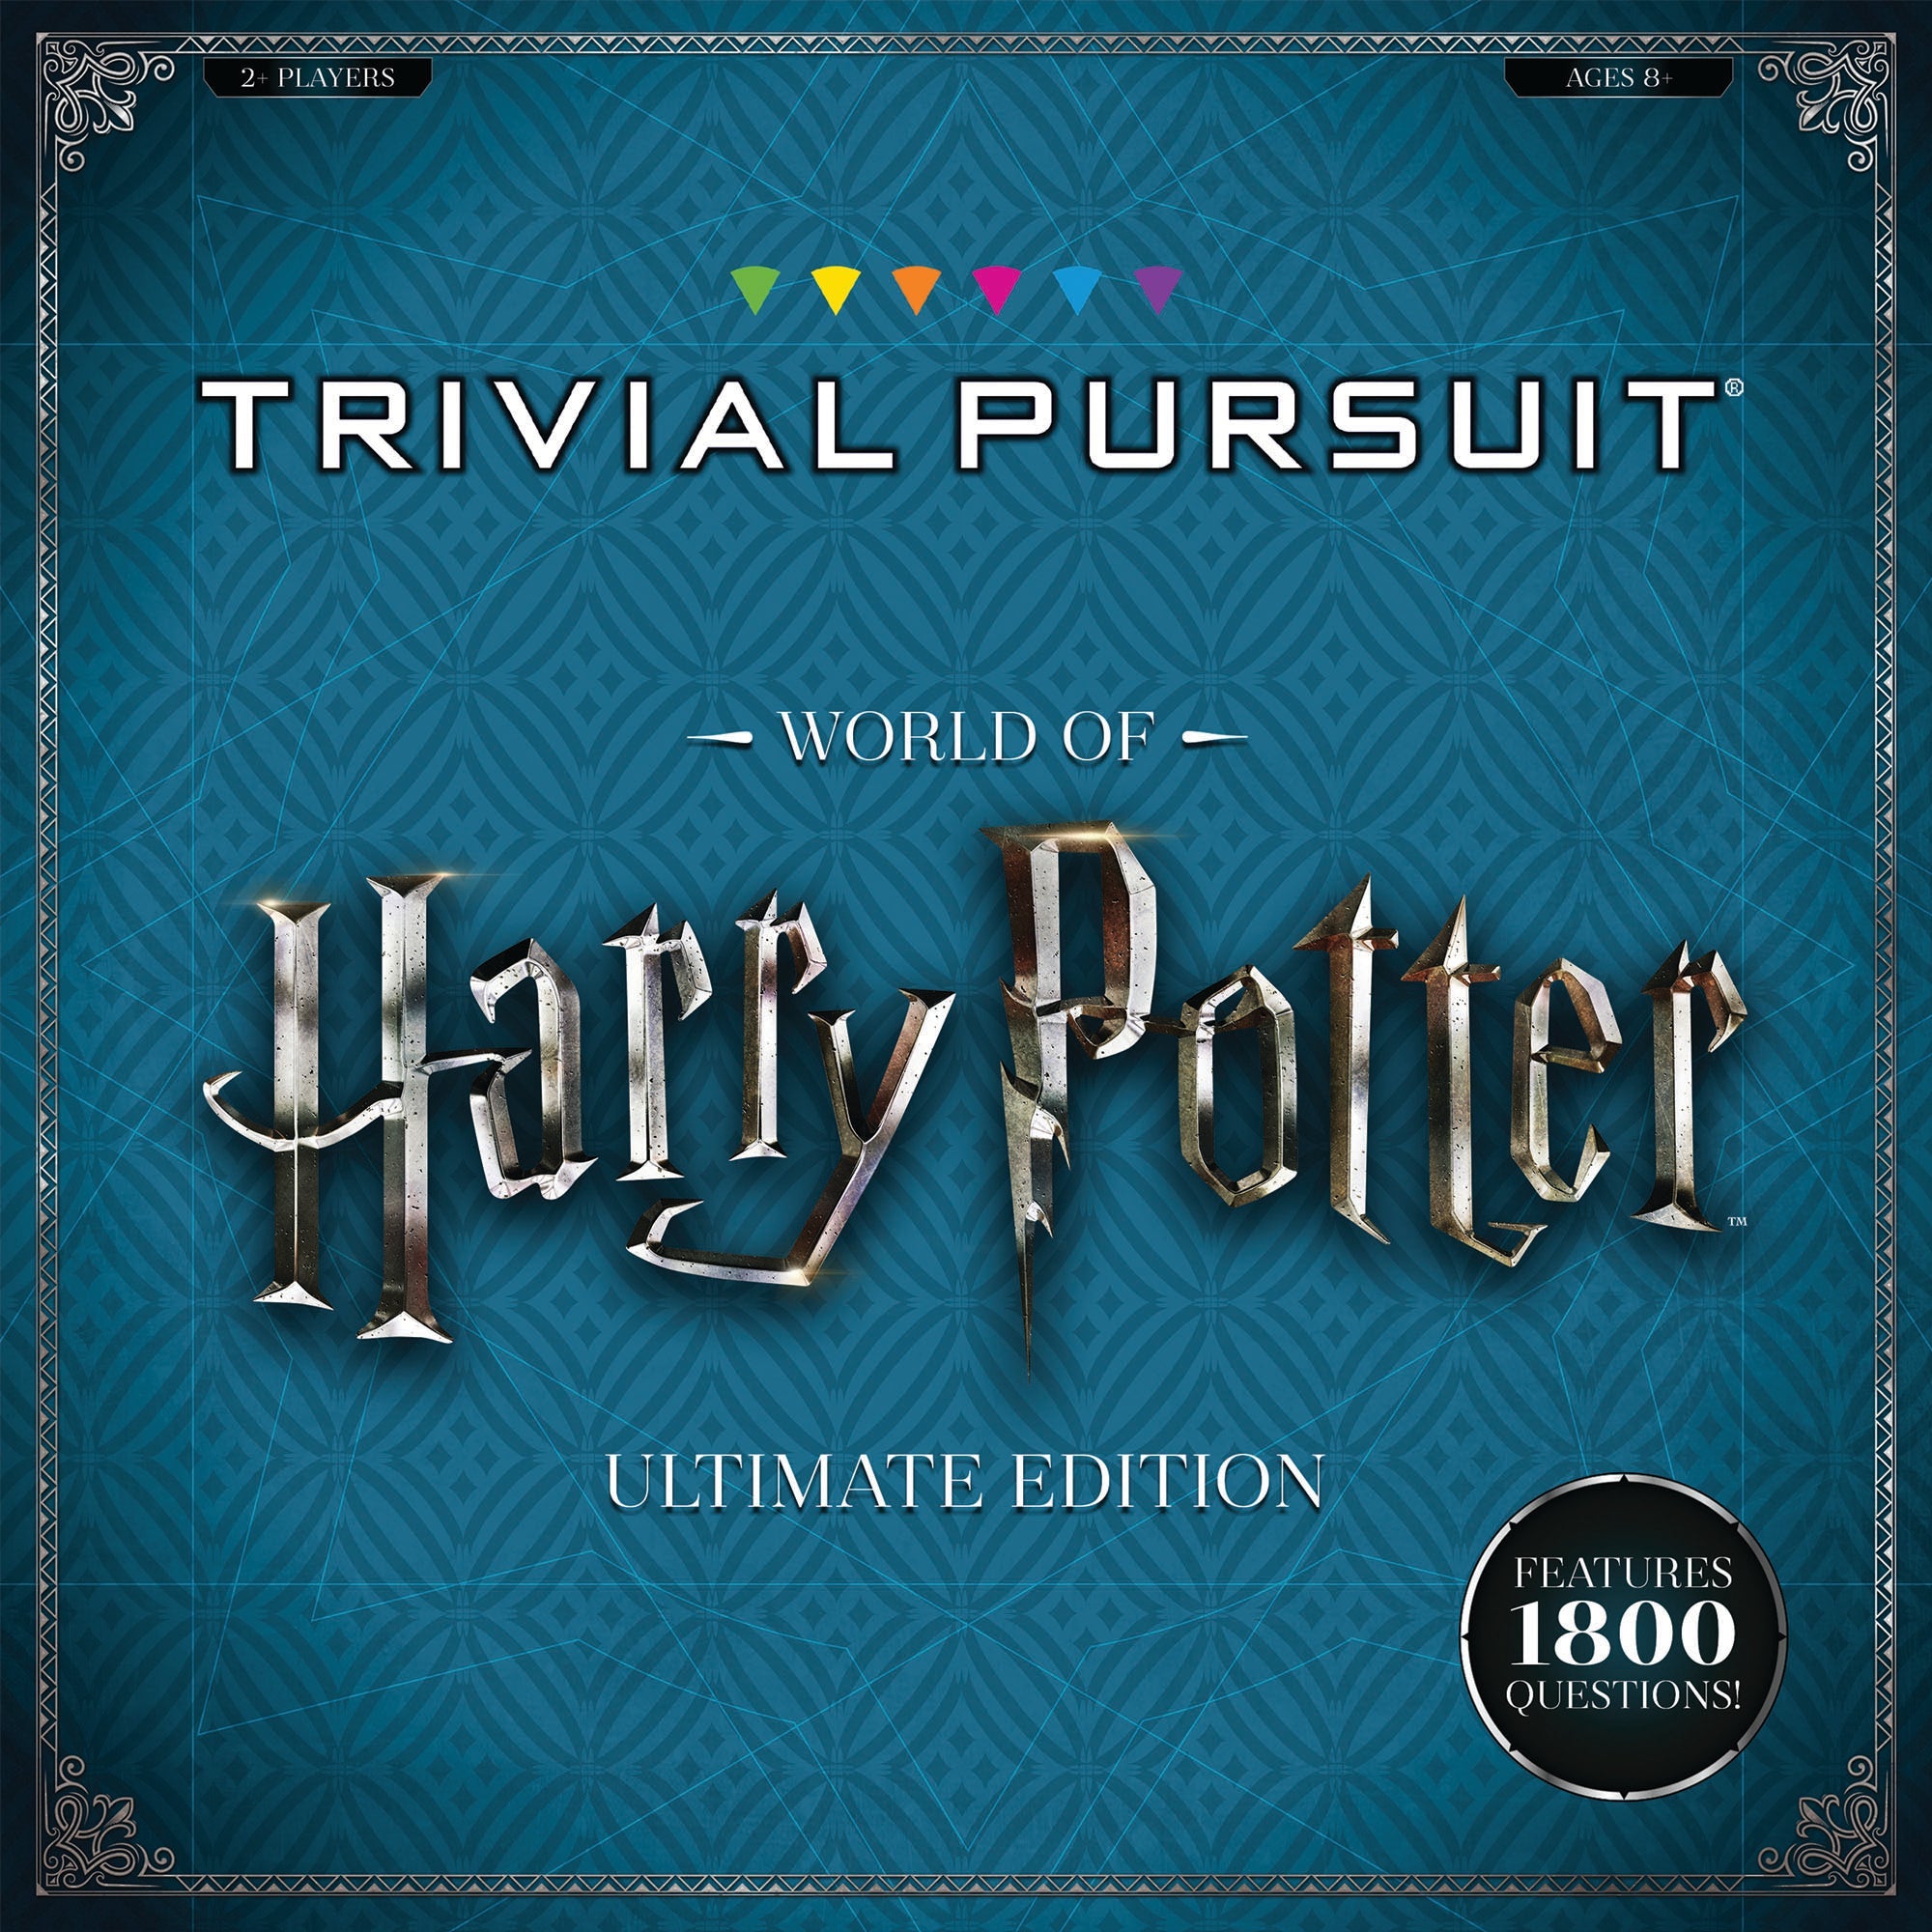 TRIVIAL PURSUIT World of Harry Potter Ultimate Edition